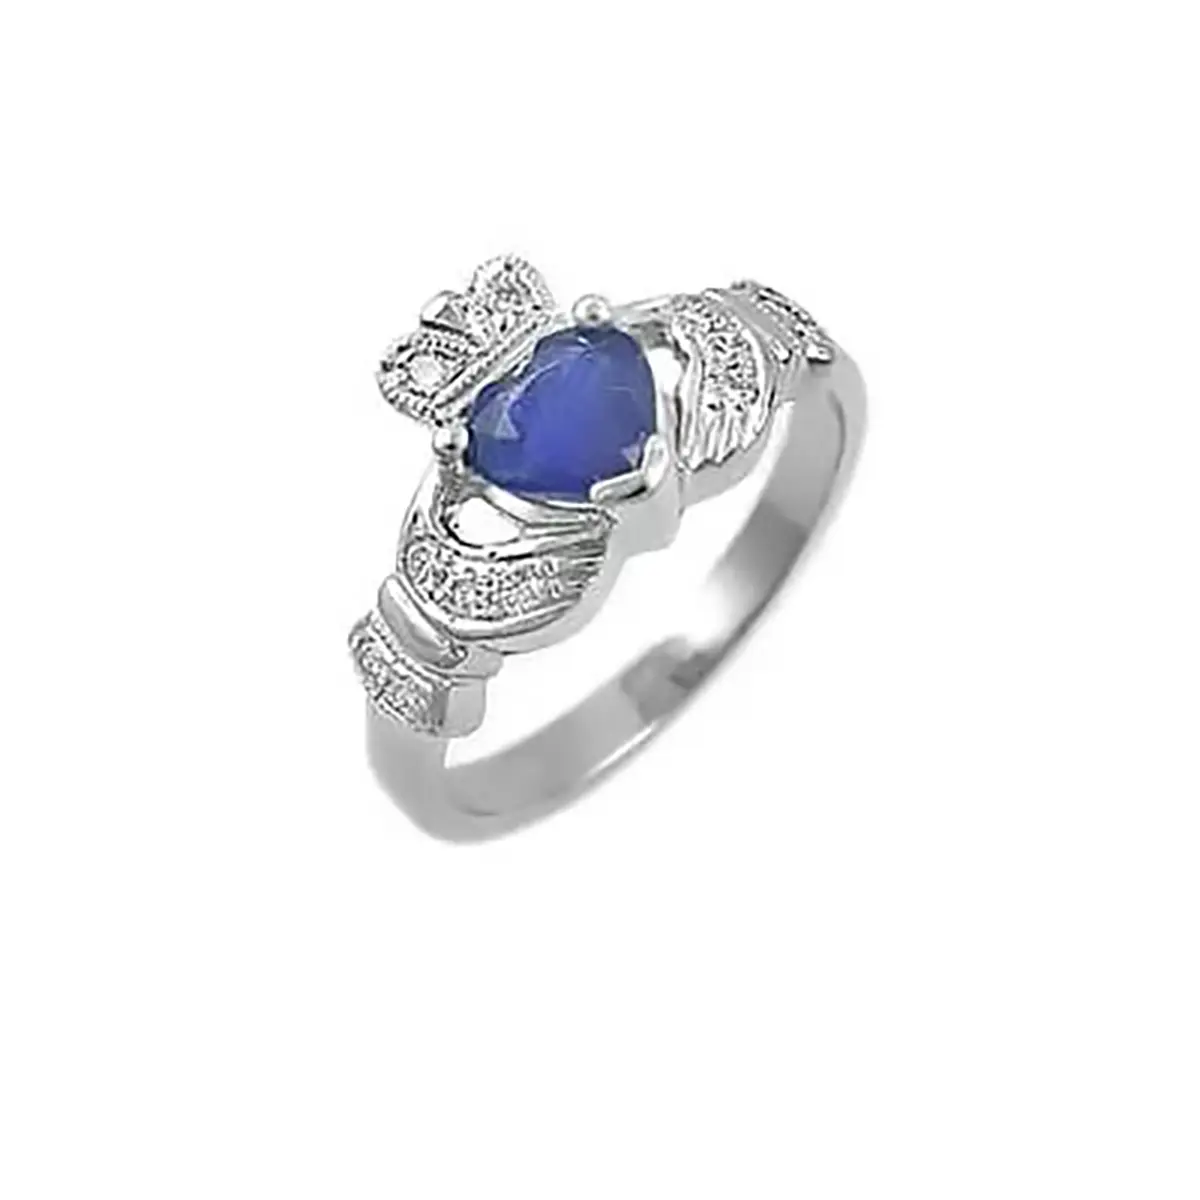 1_white Gold Sapphire Claddagh Ring